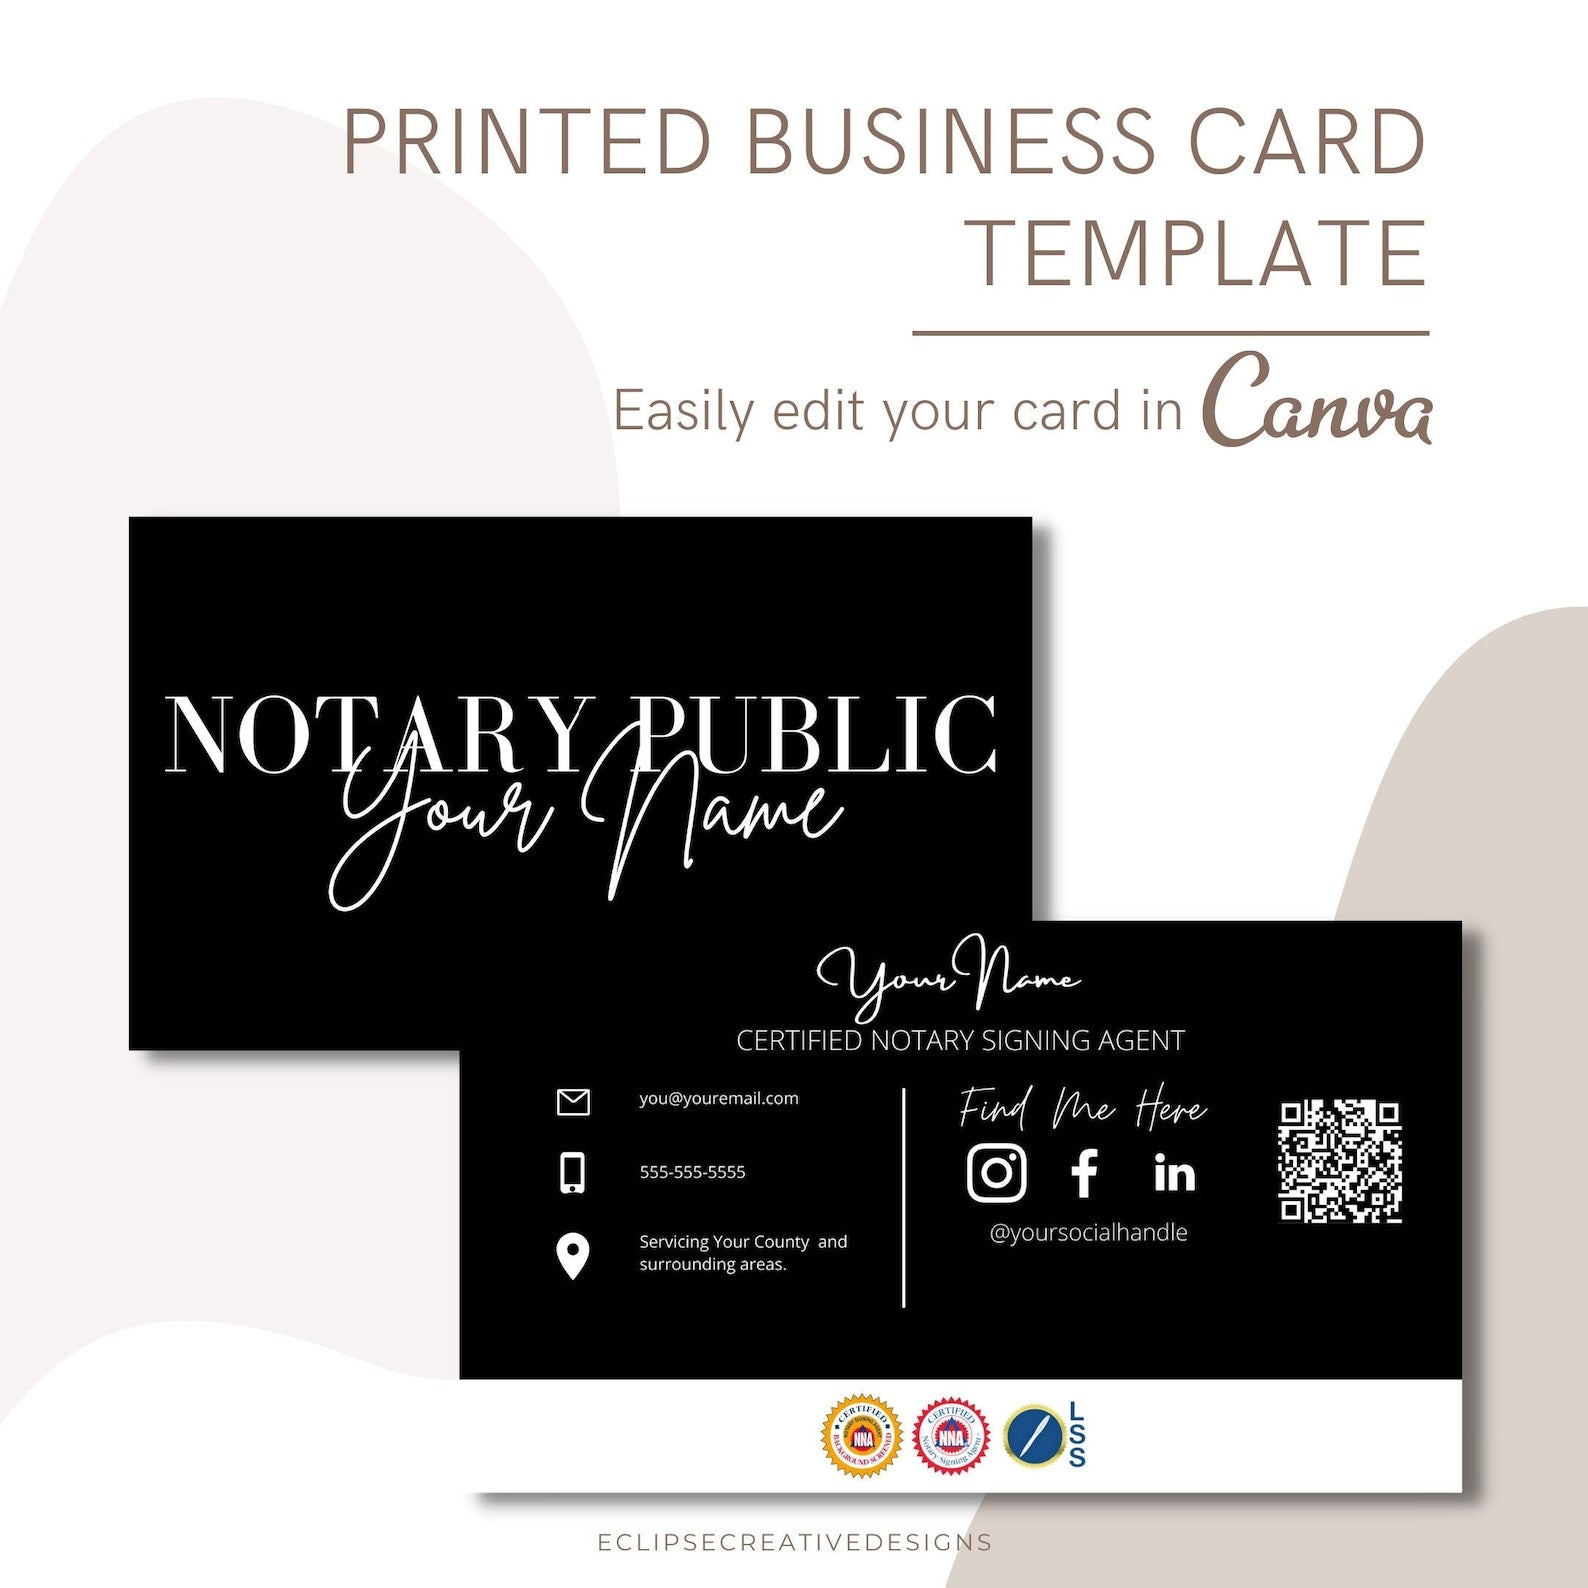 Printed Notary Business Card Made With Canva, Canva Template For Notary Signing Agents, Professional Notary Business Card, Notary Branding